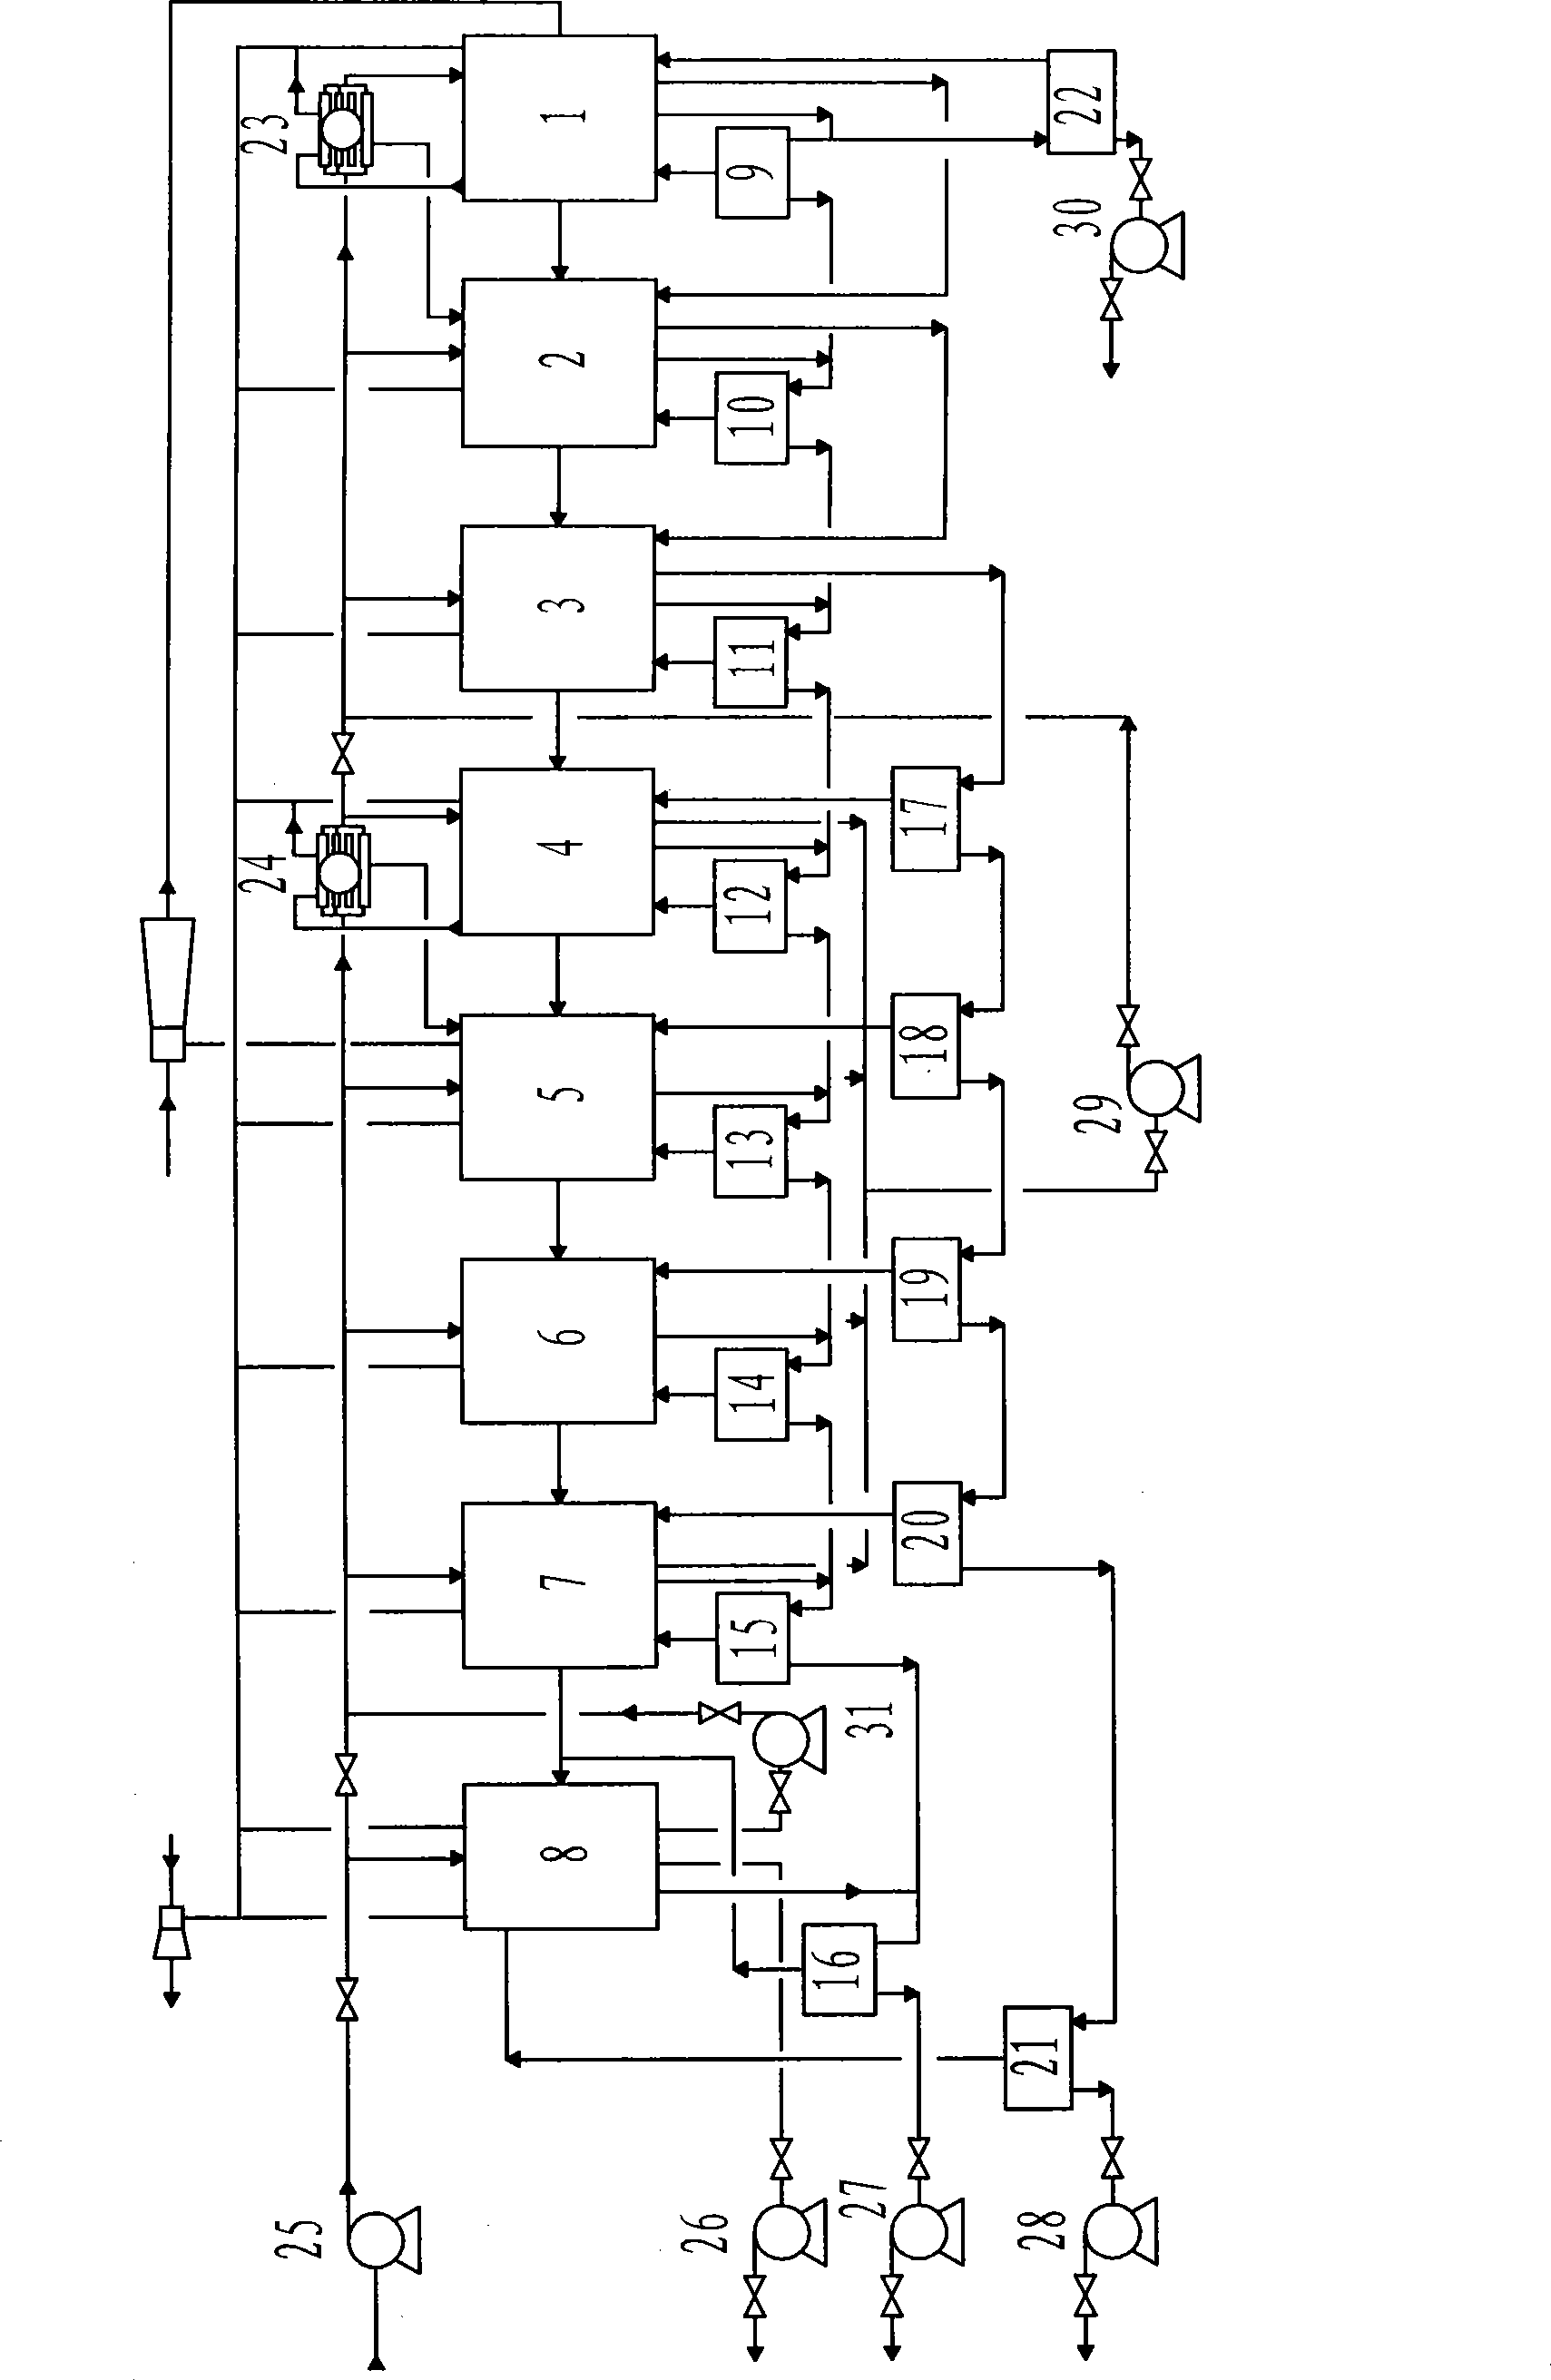 Low temperature multiple-effect distillation seawater desalination system and process flow thereof